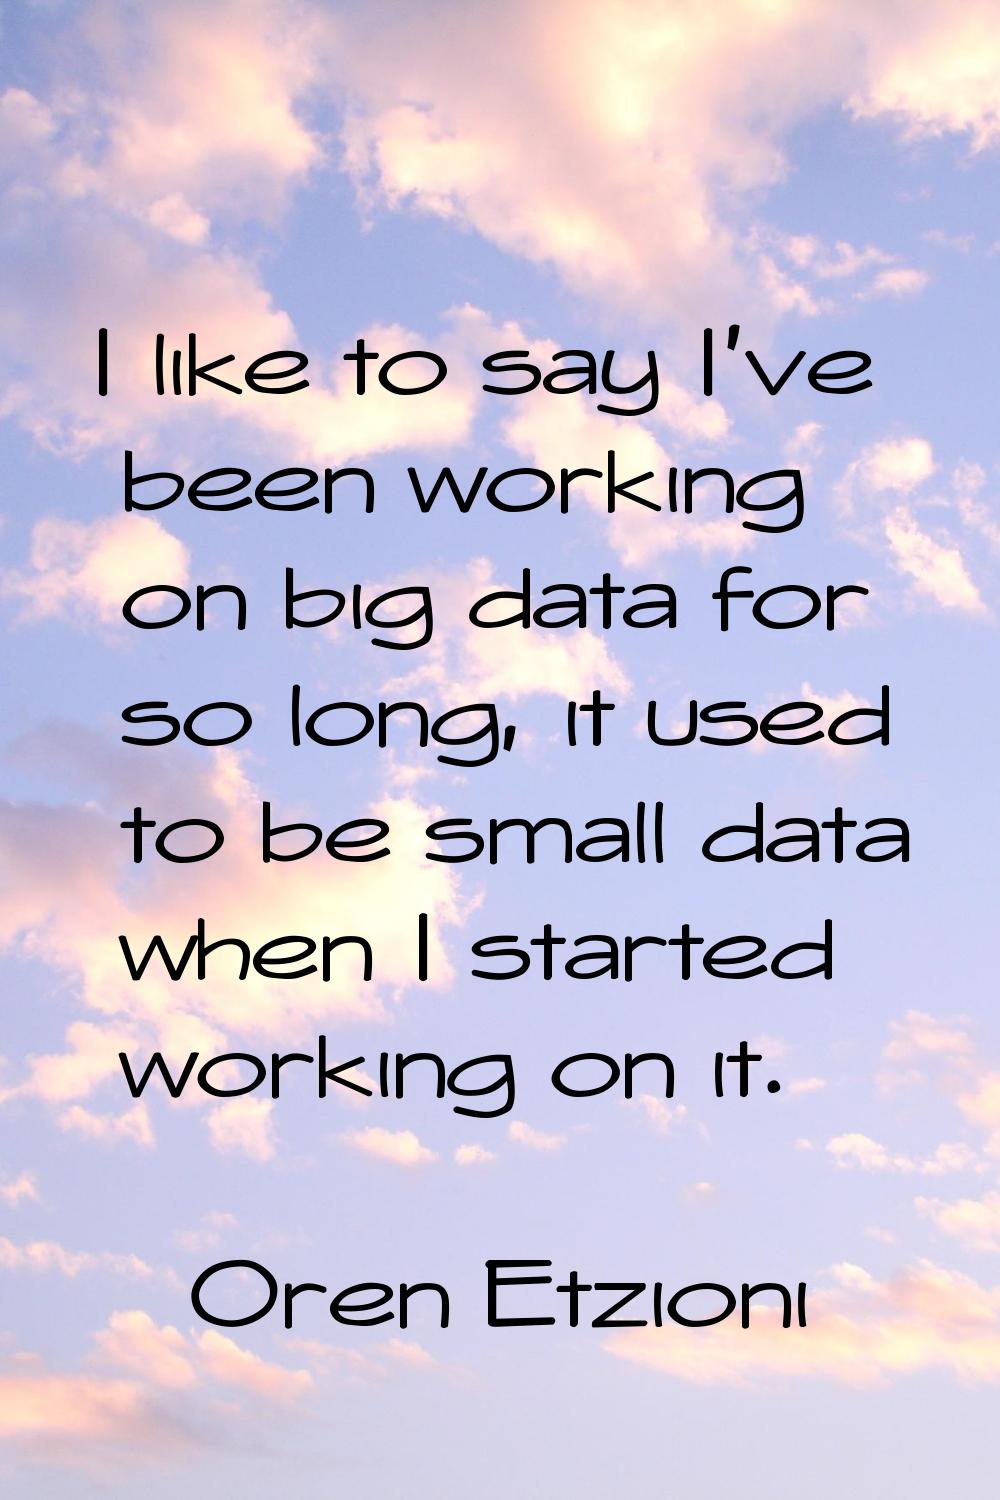 I like to say I've been working on big data for so long, it used to be small data when I started wo